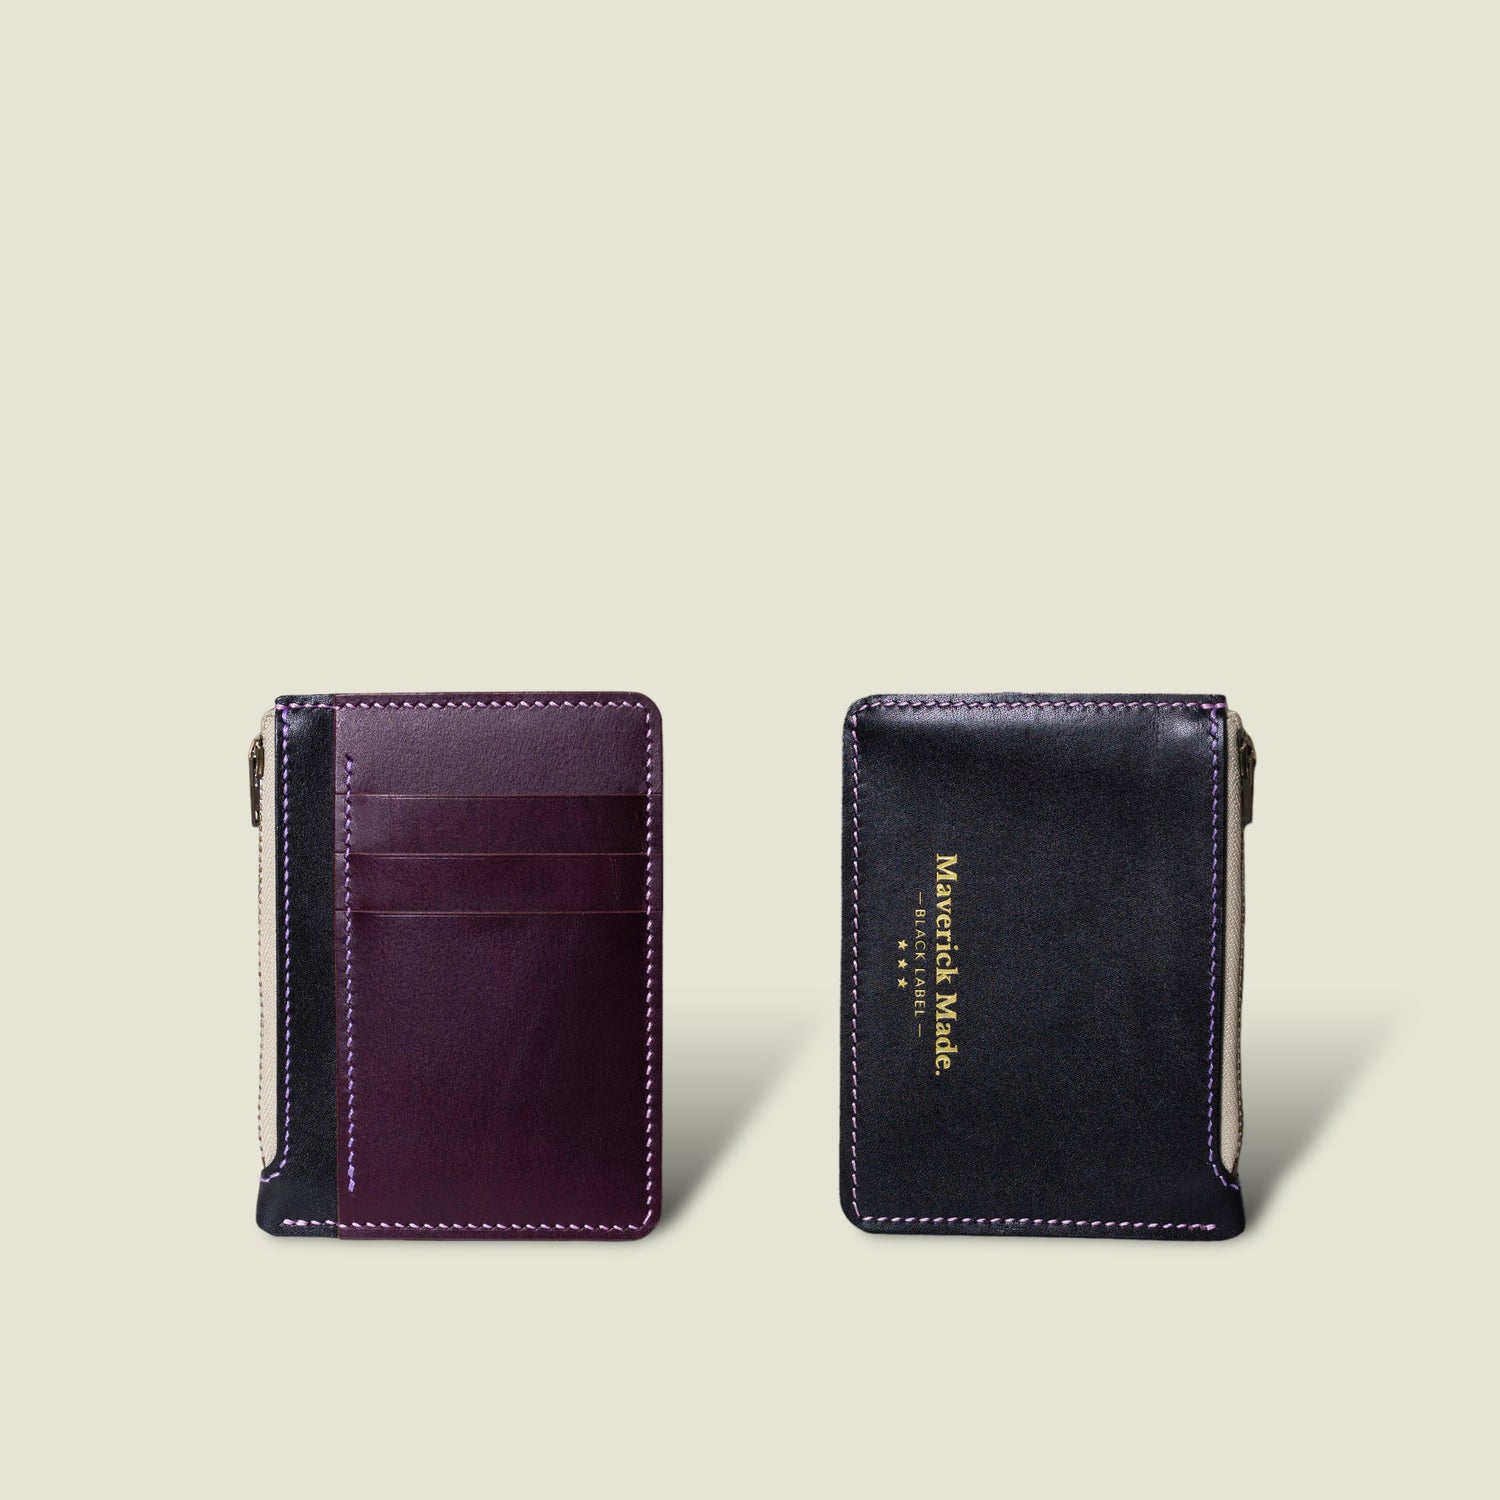 Artisanal Leather Wallets and Personalised Gifts